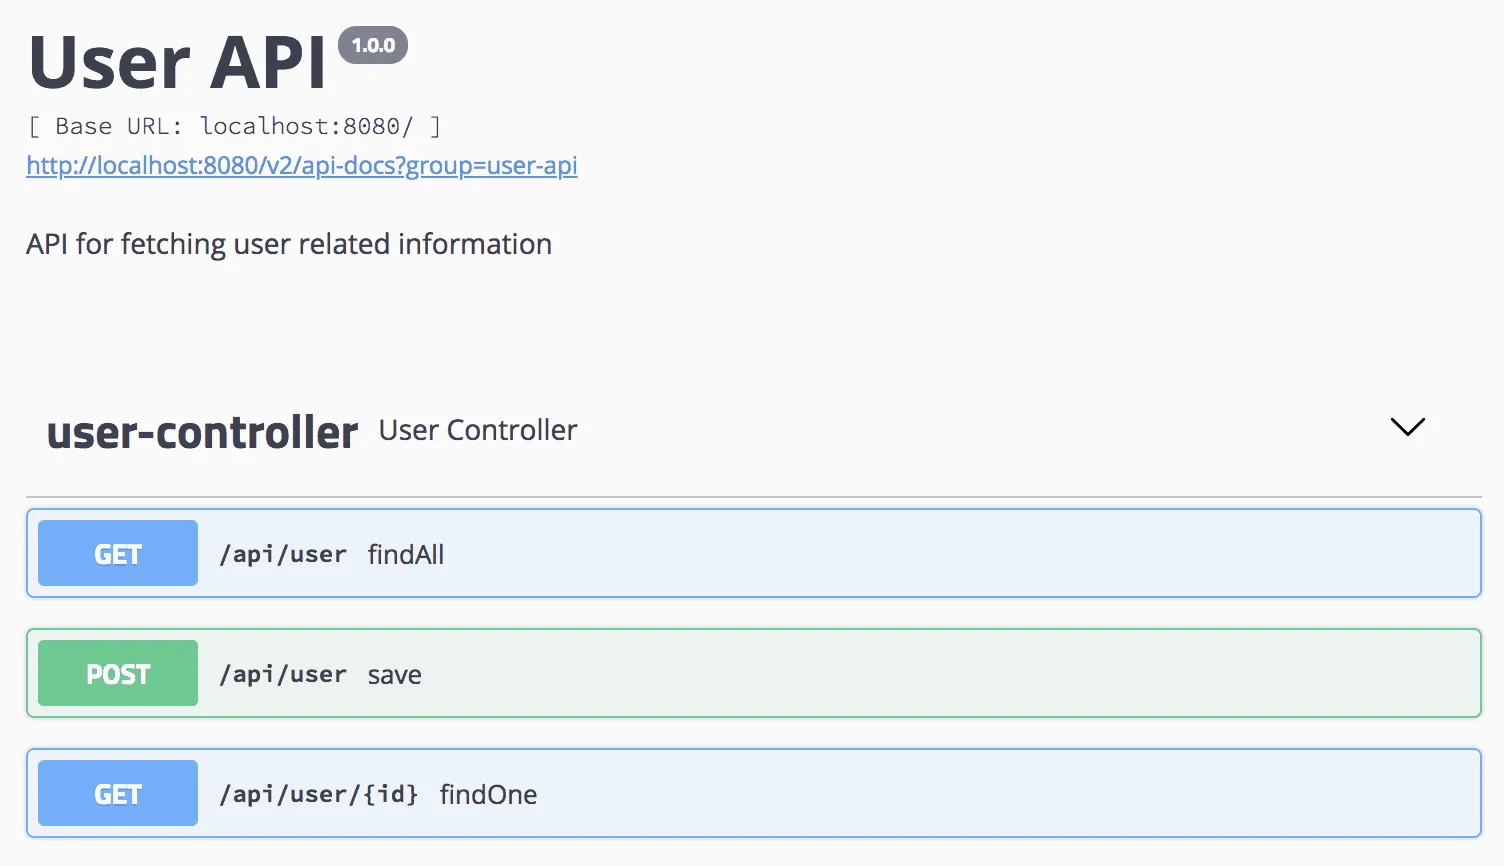 Screenshot of our API within Swagger UI